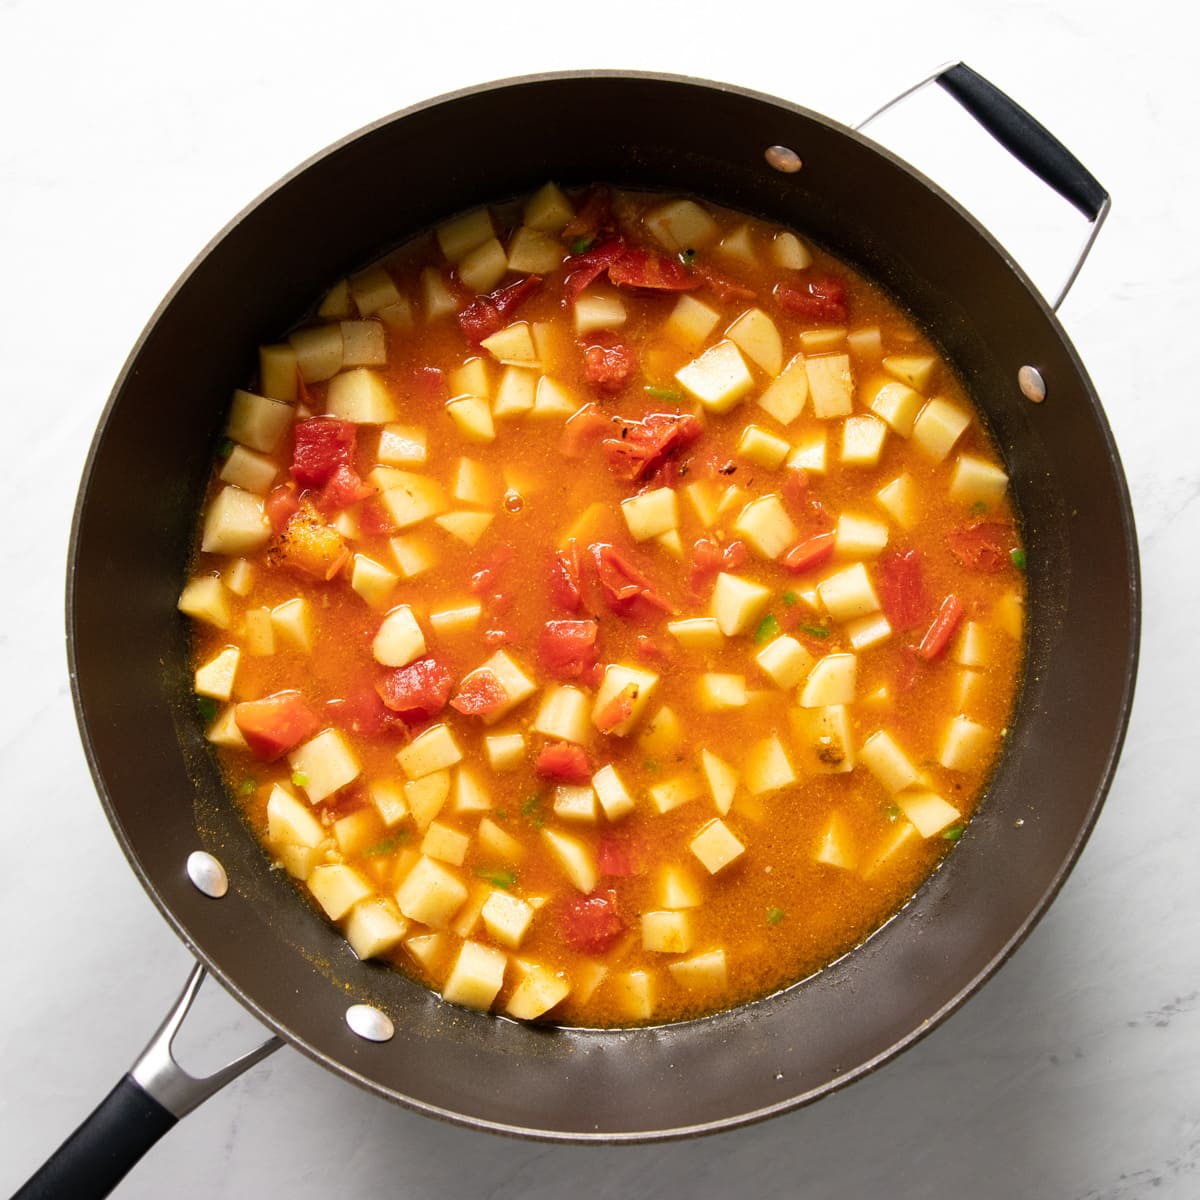 A skillet filled with canned tomatoes, uncooked diced potatoes, and a vegetarian broth ready to simmer. 